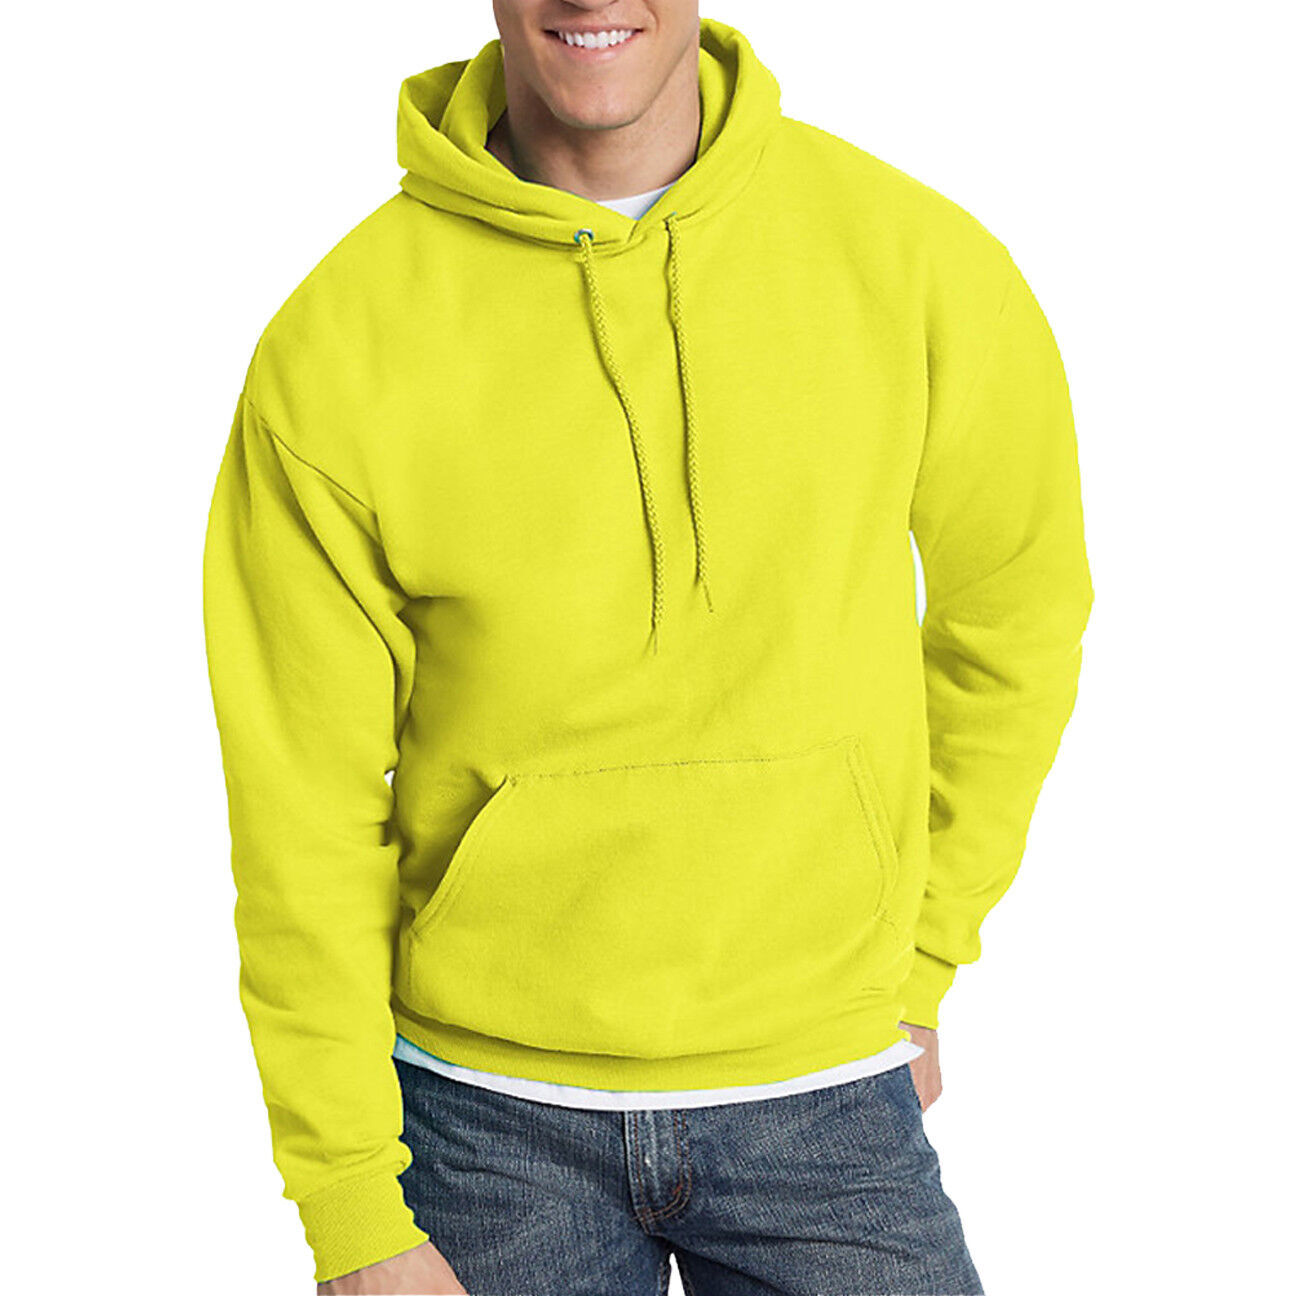 Primary image for Hanes Mens Hooded Sweatshirt Safety Green Orange ANSI Hoodie S-3XL NEW